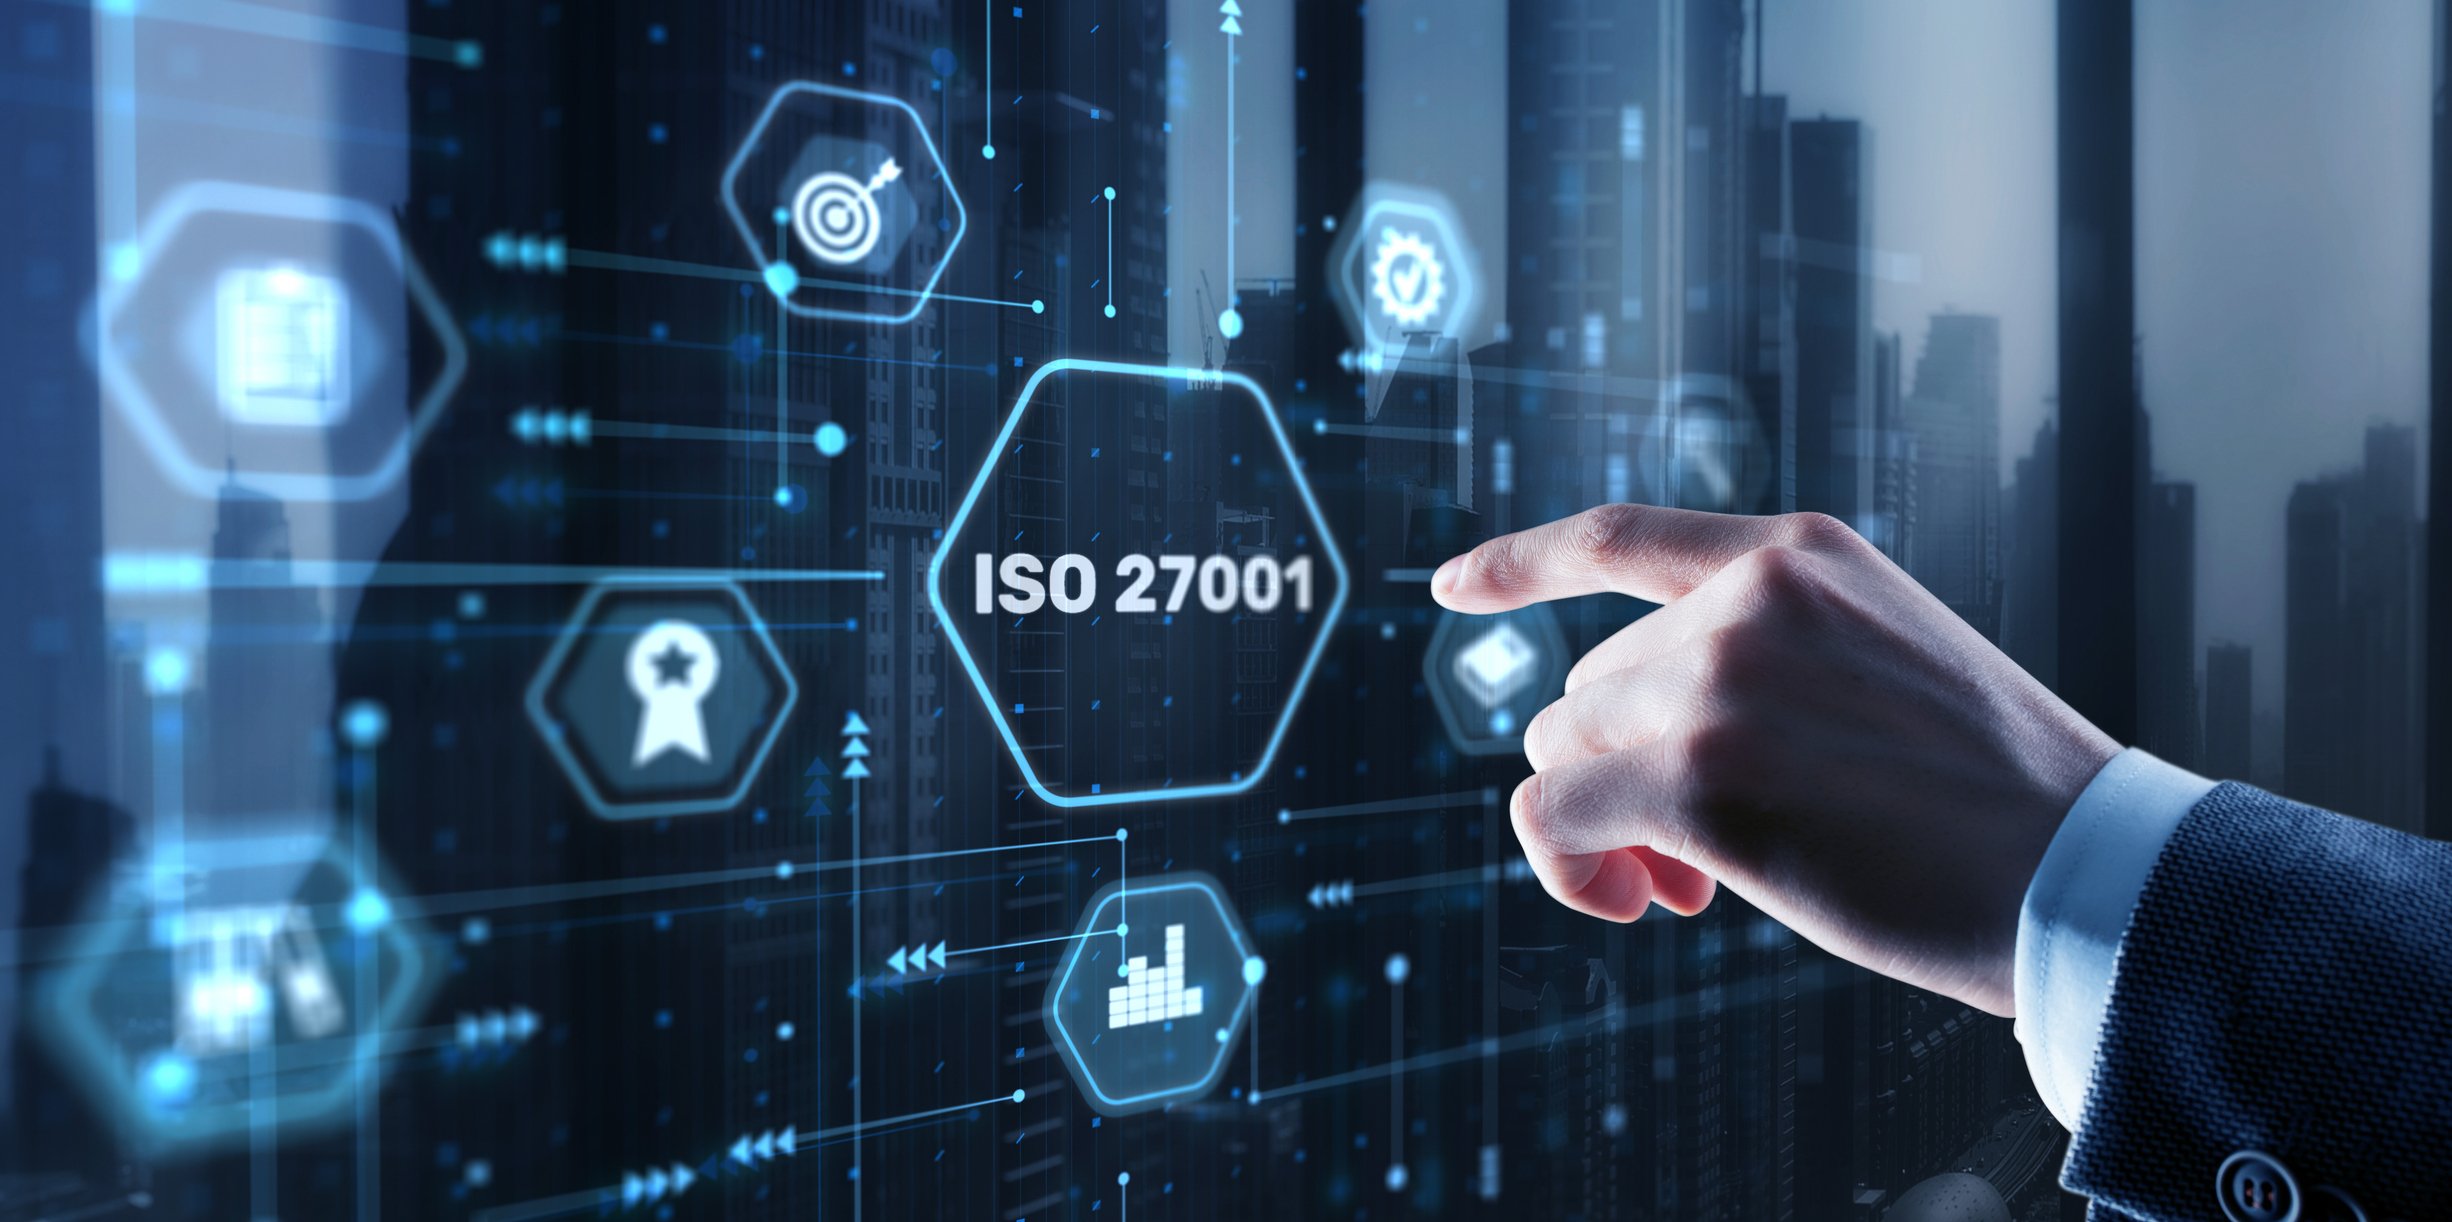 ISO 27001.